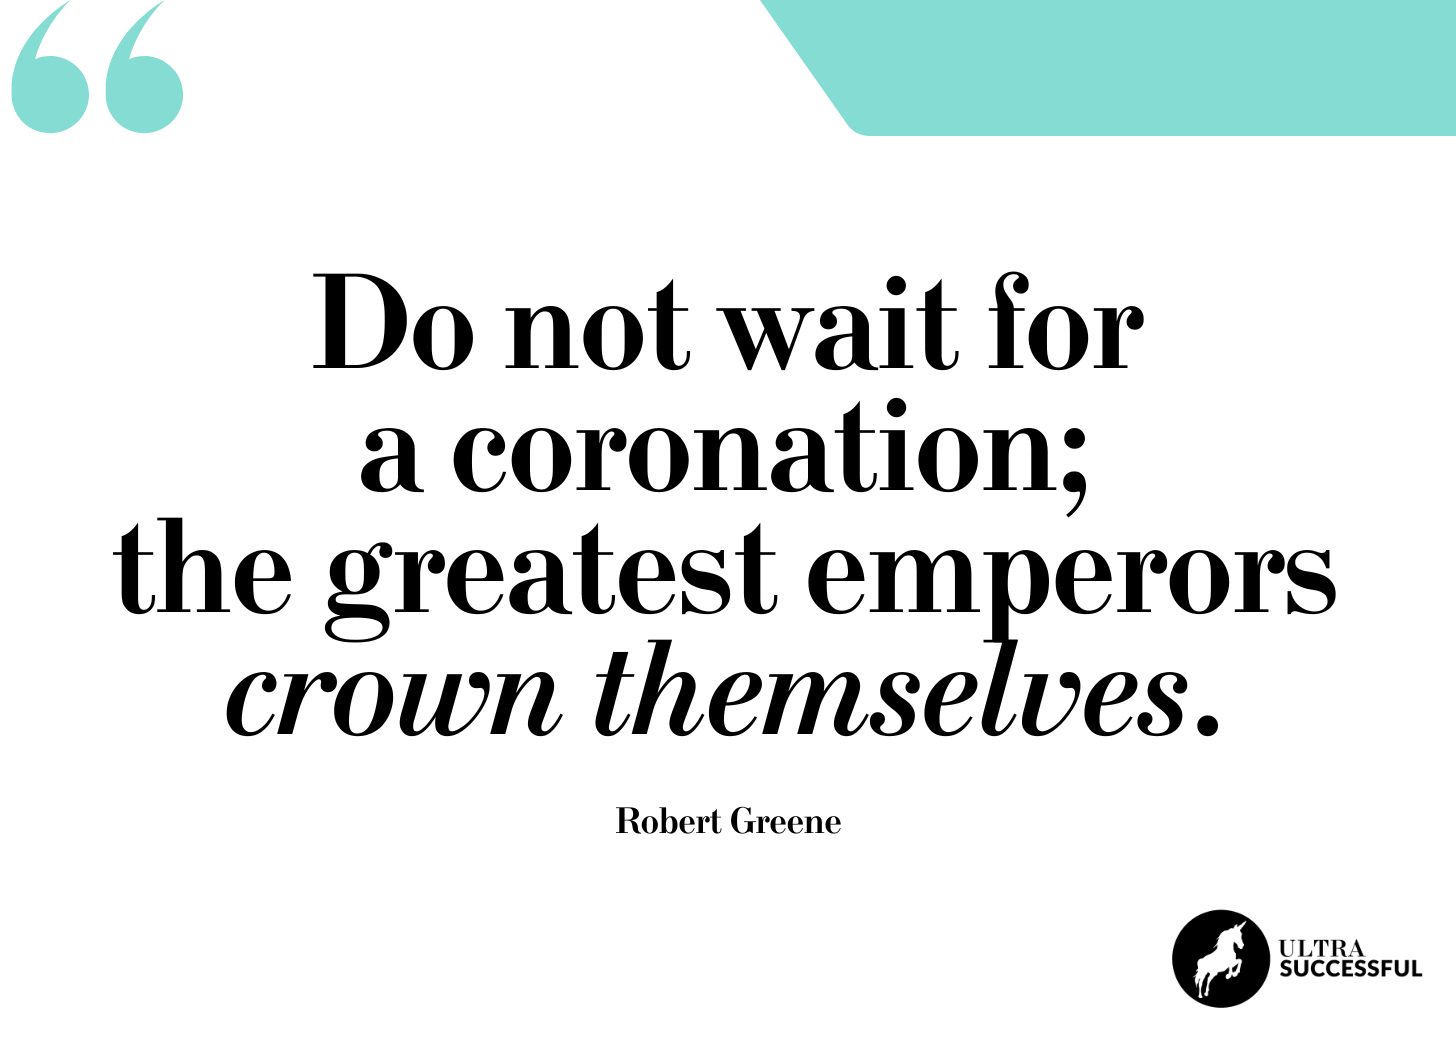 Do not wait for a coronation; the greatest emperors crown themselves.